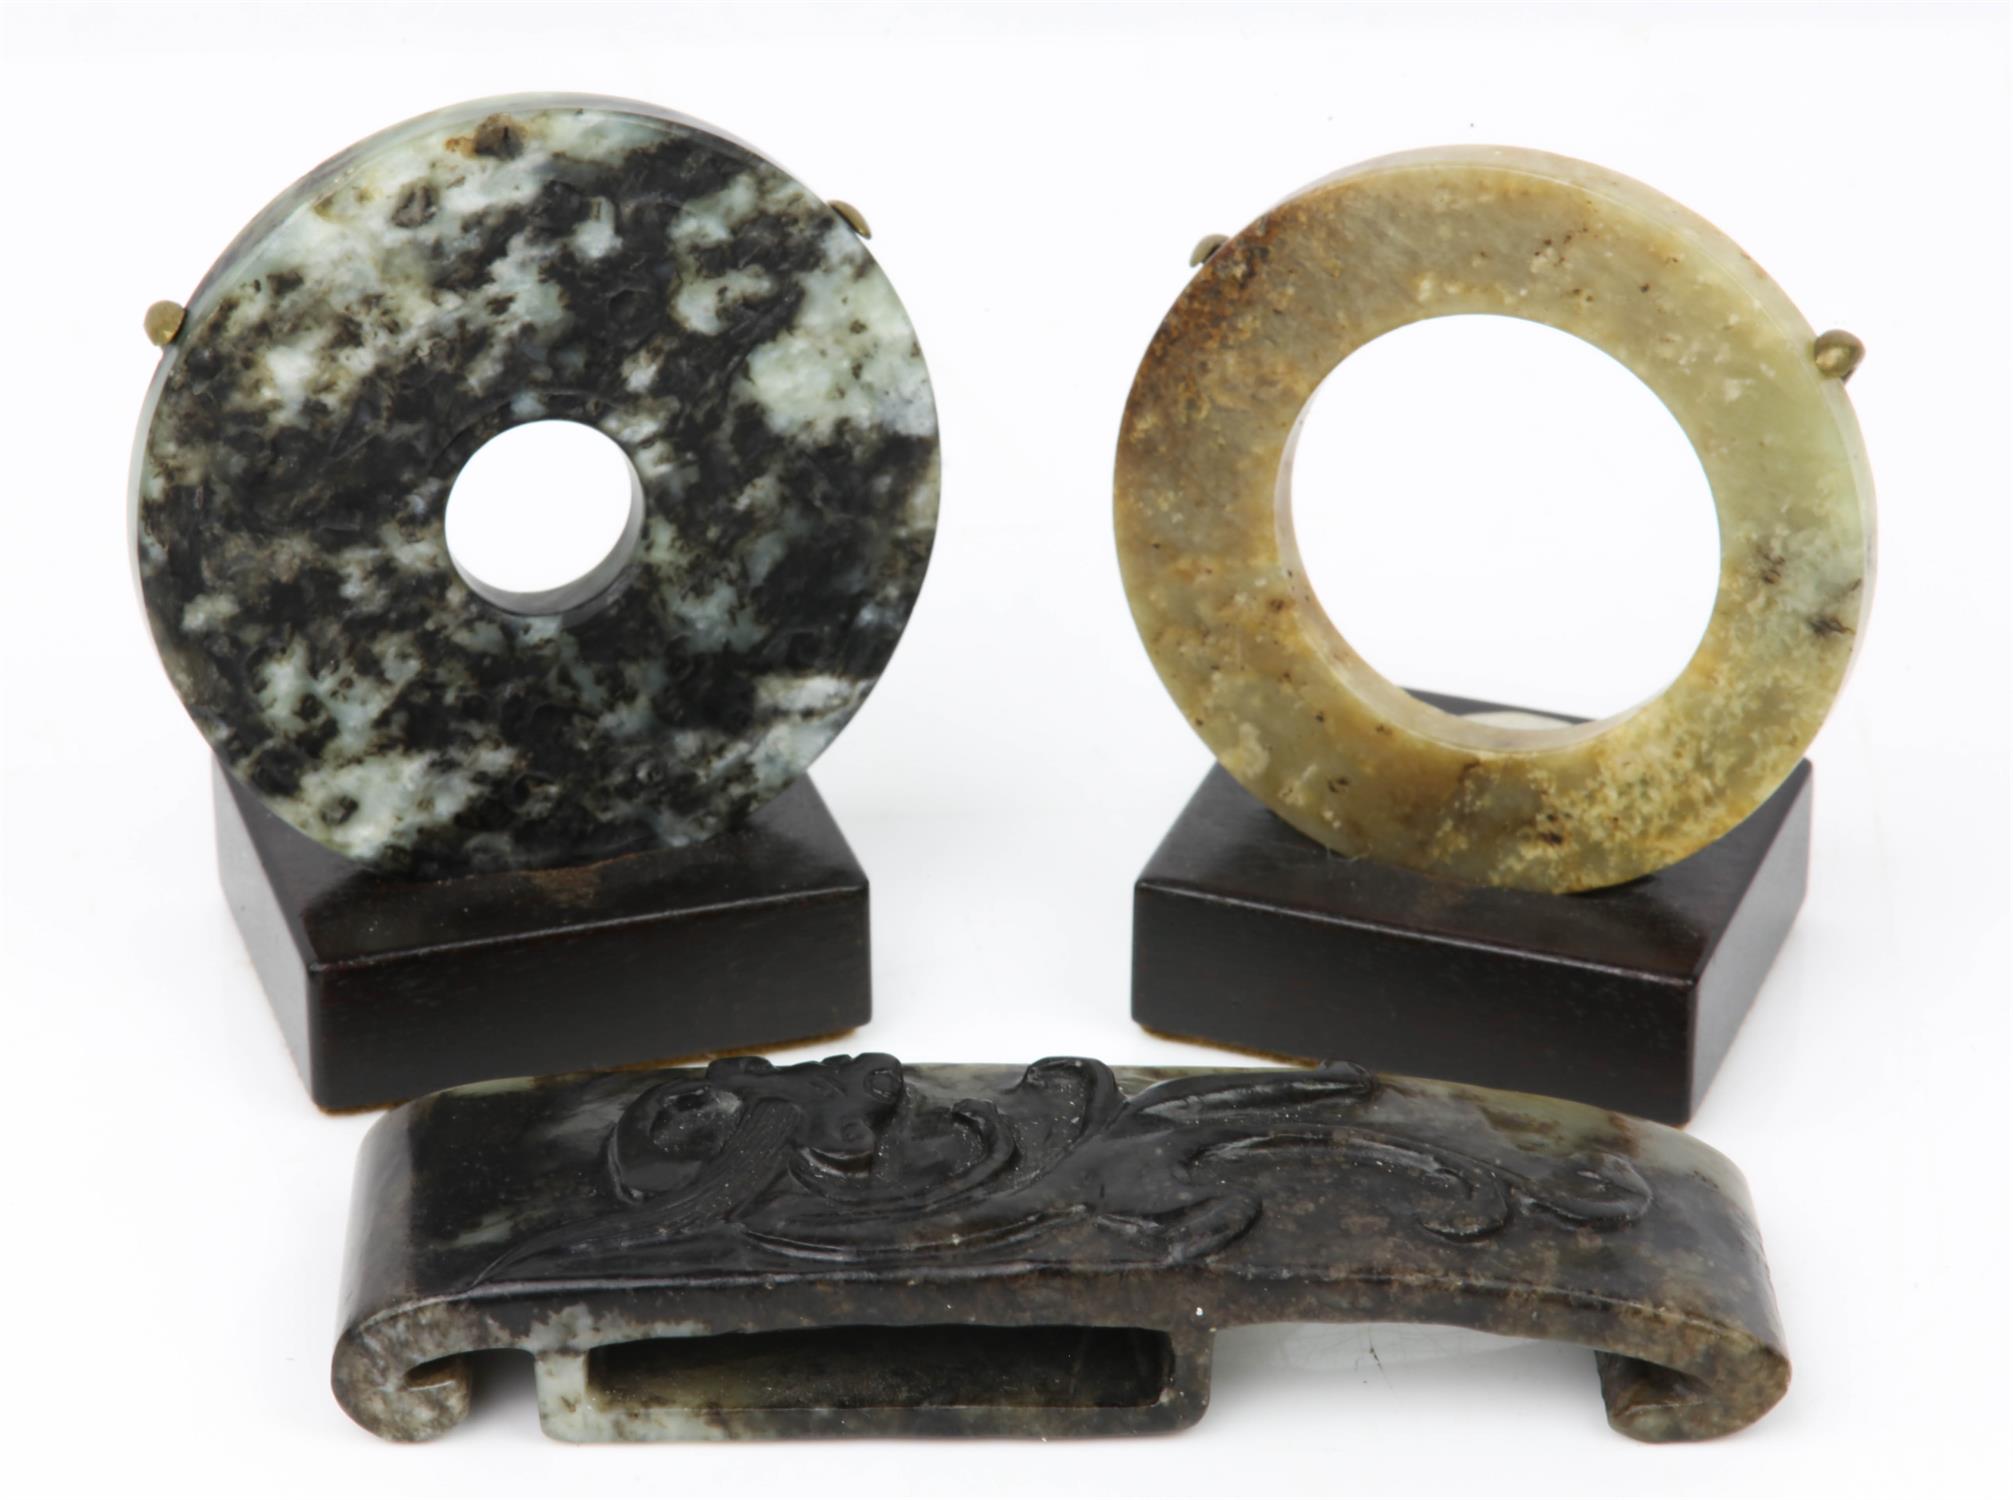 Chinese jade mottled black and grey bi-disc, one side carved with scrolling decoration,